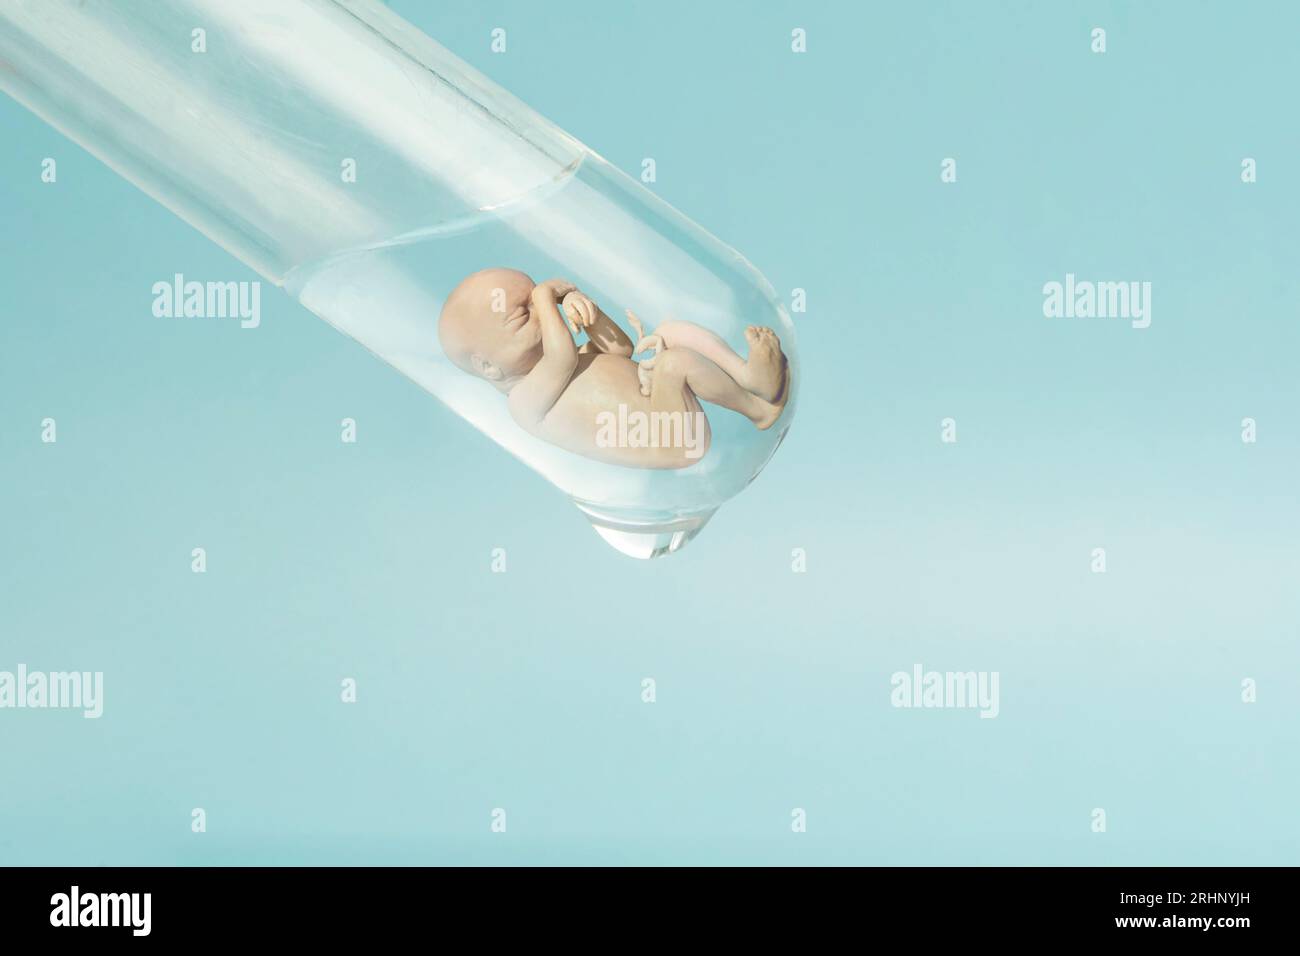 Artificial insemination. Test tube baby, IVF. A human embryo in a glass tube on a blue laboratory background. The concept of artificial insemination o Stock Photo